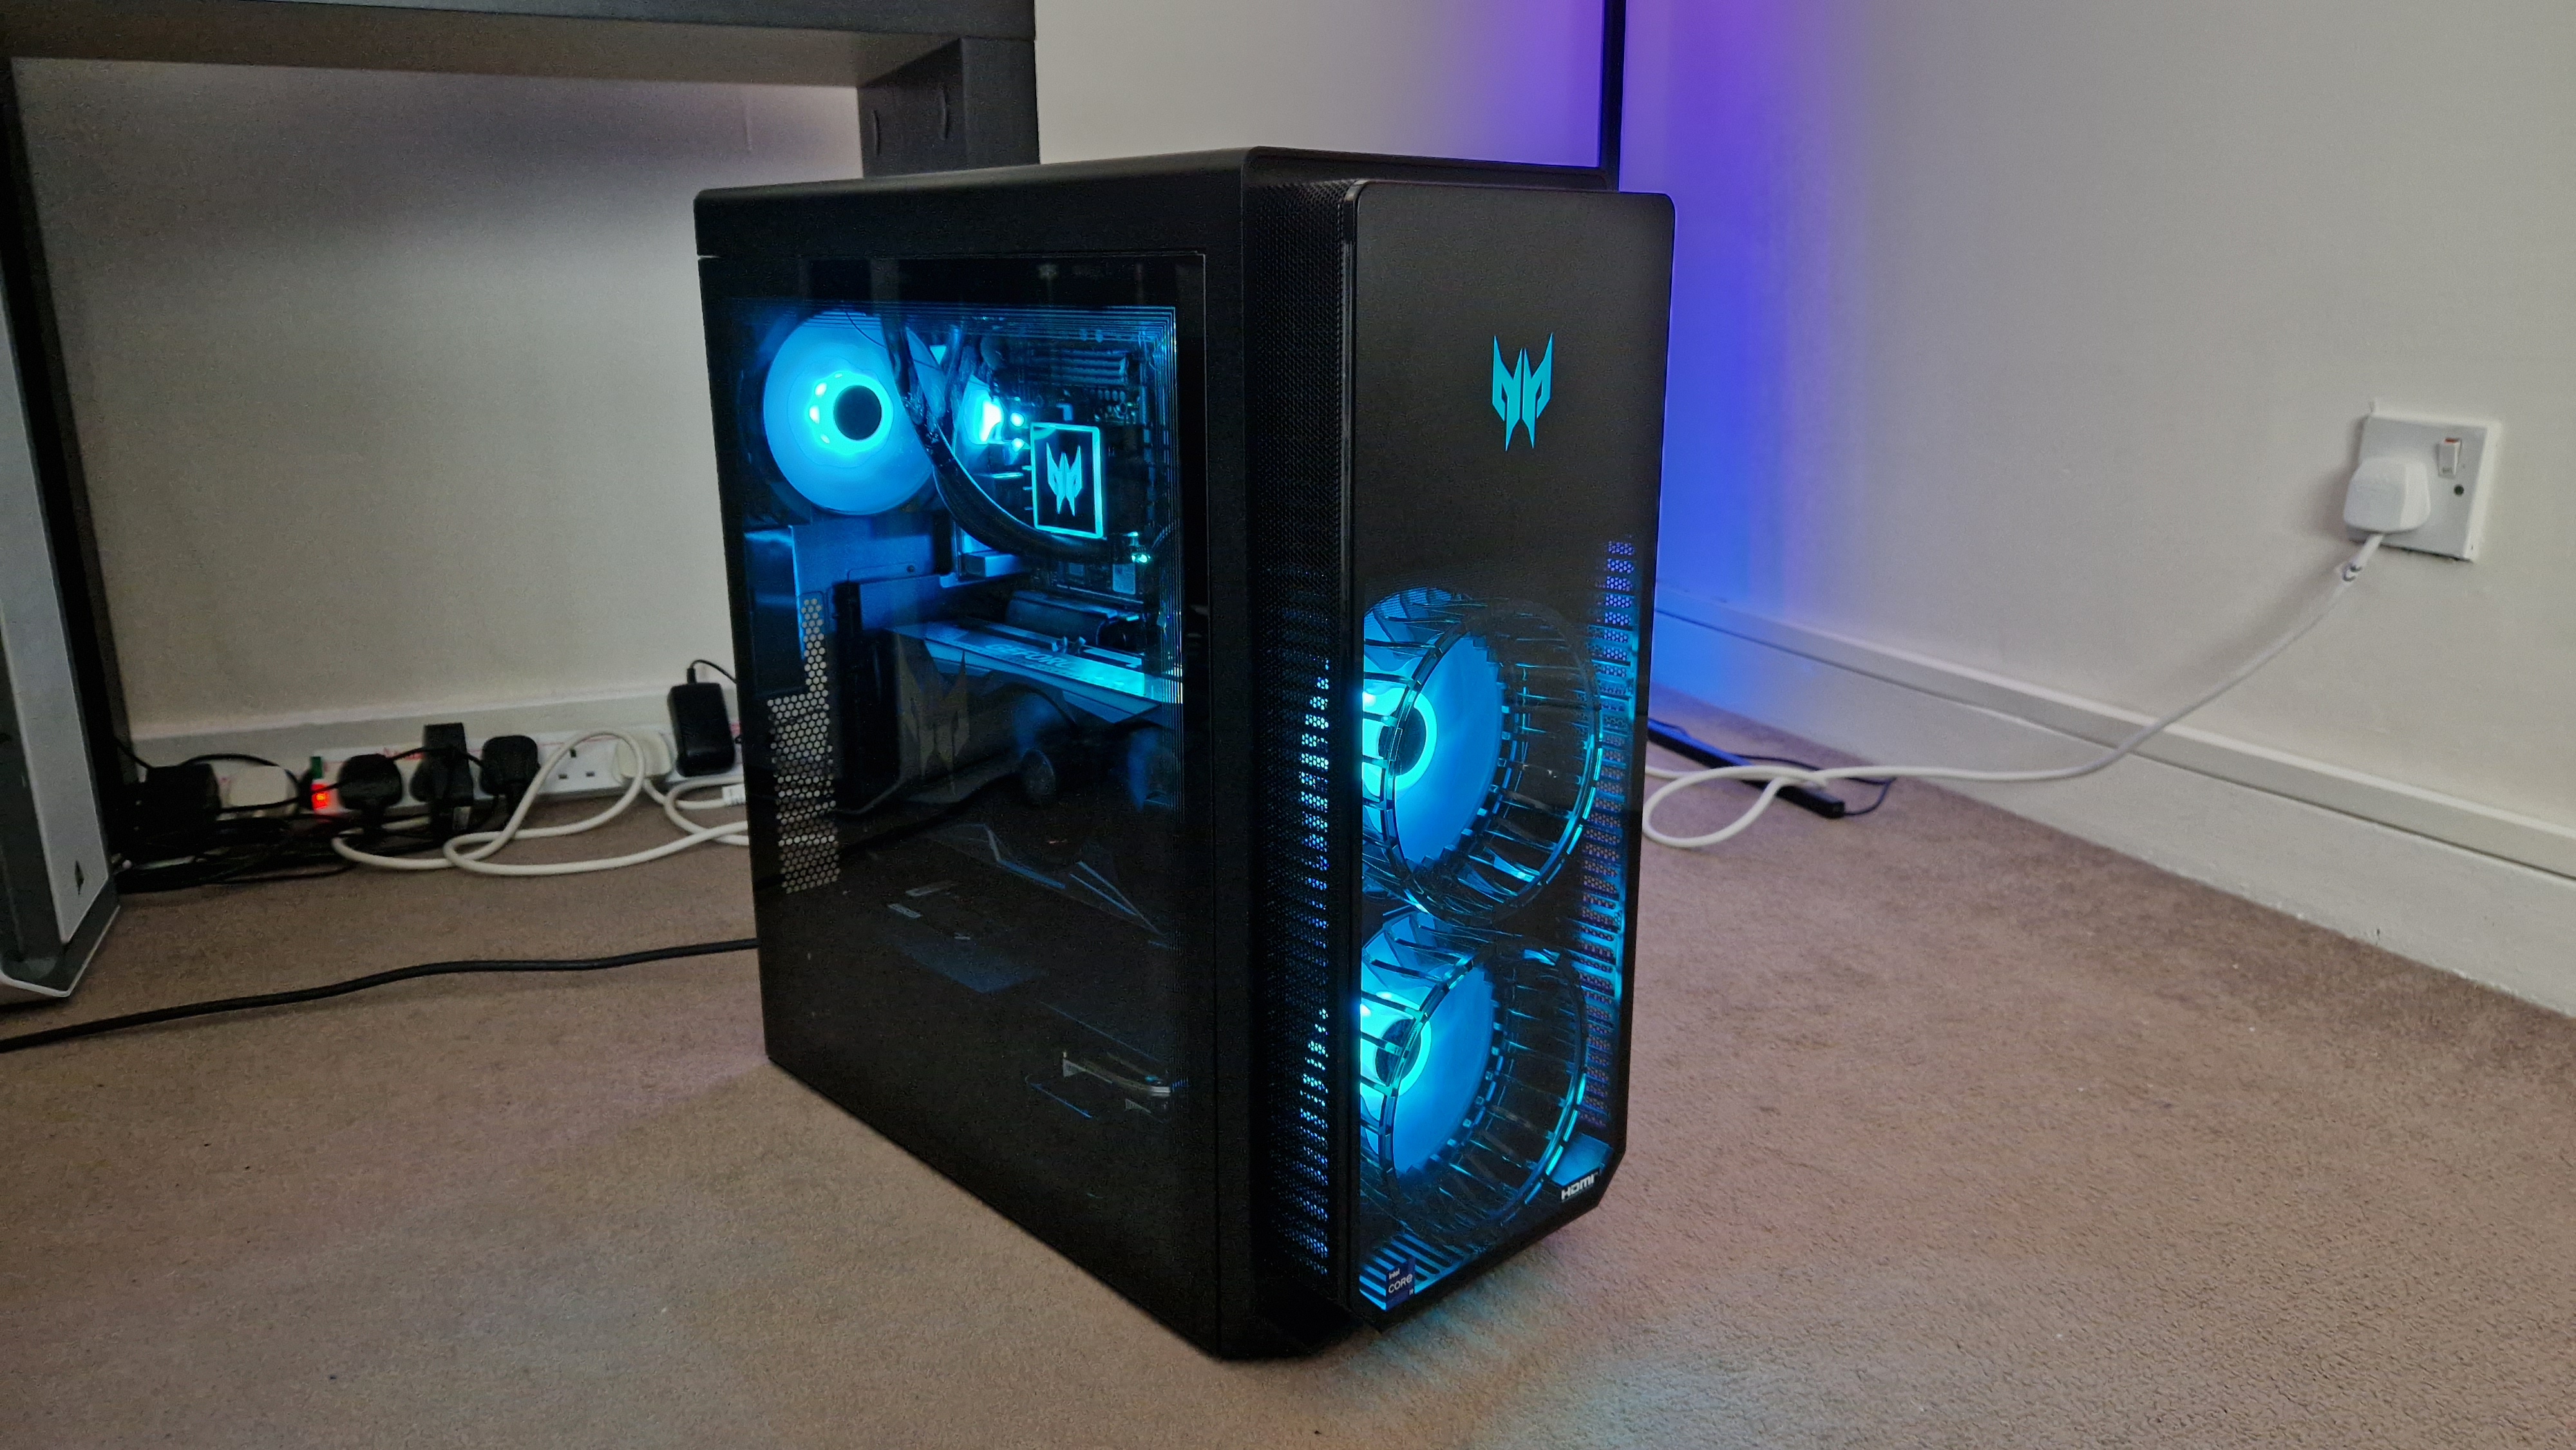 Acer Predator Orion 7000 chassis with blue RGB lighting